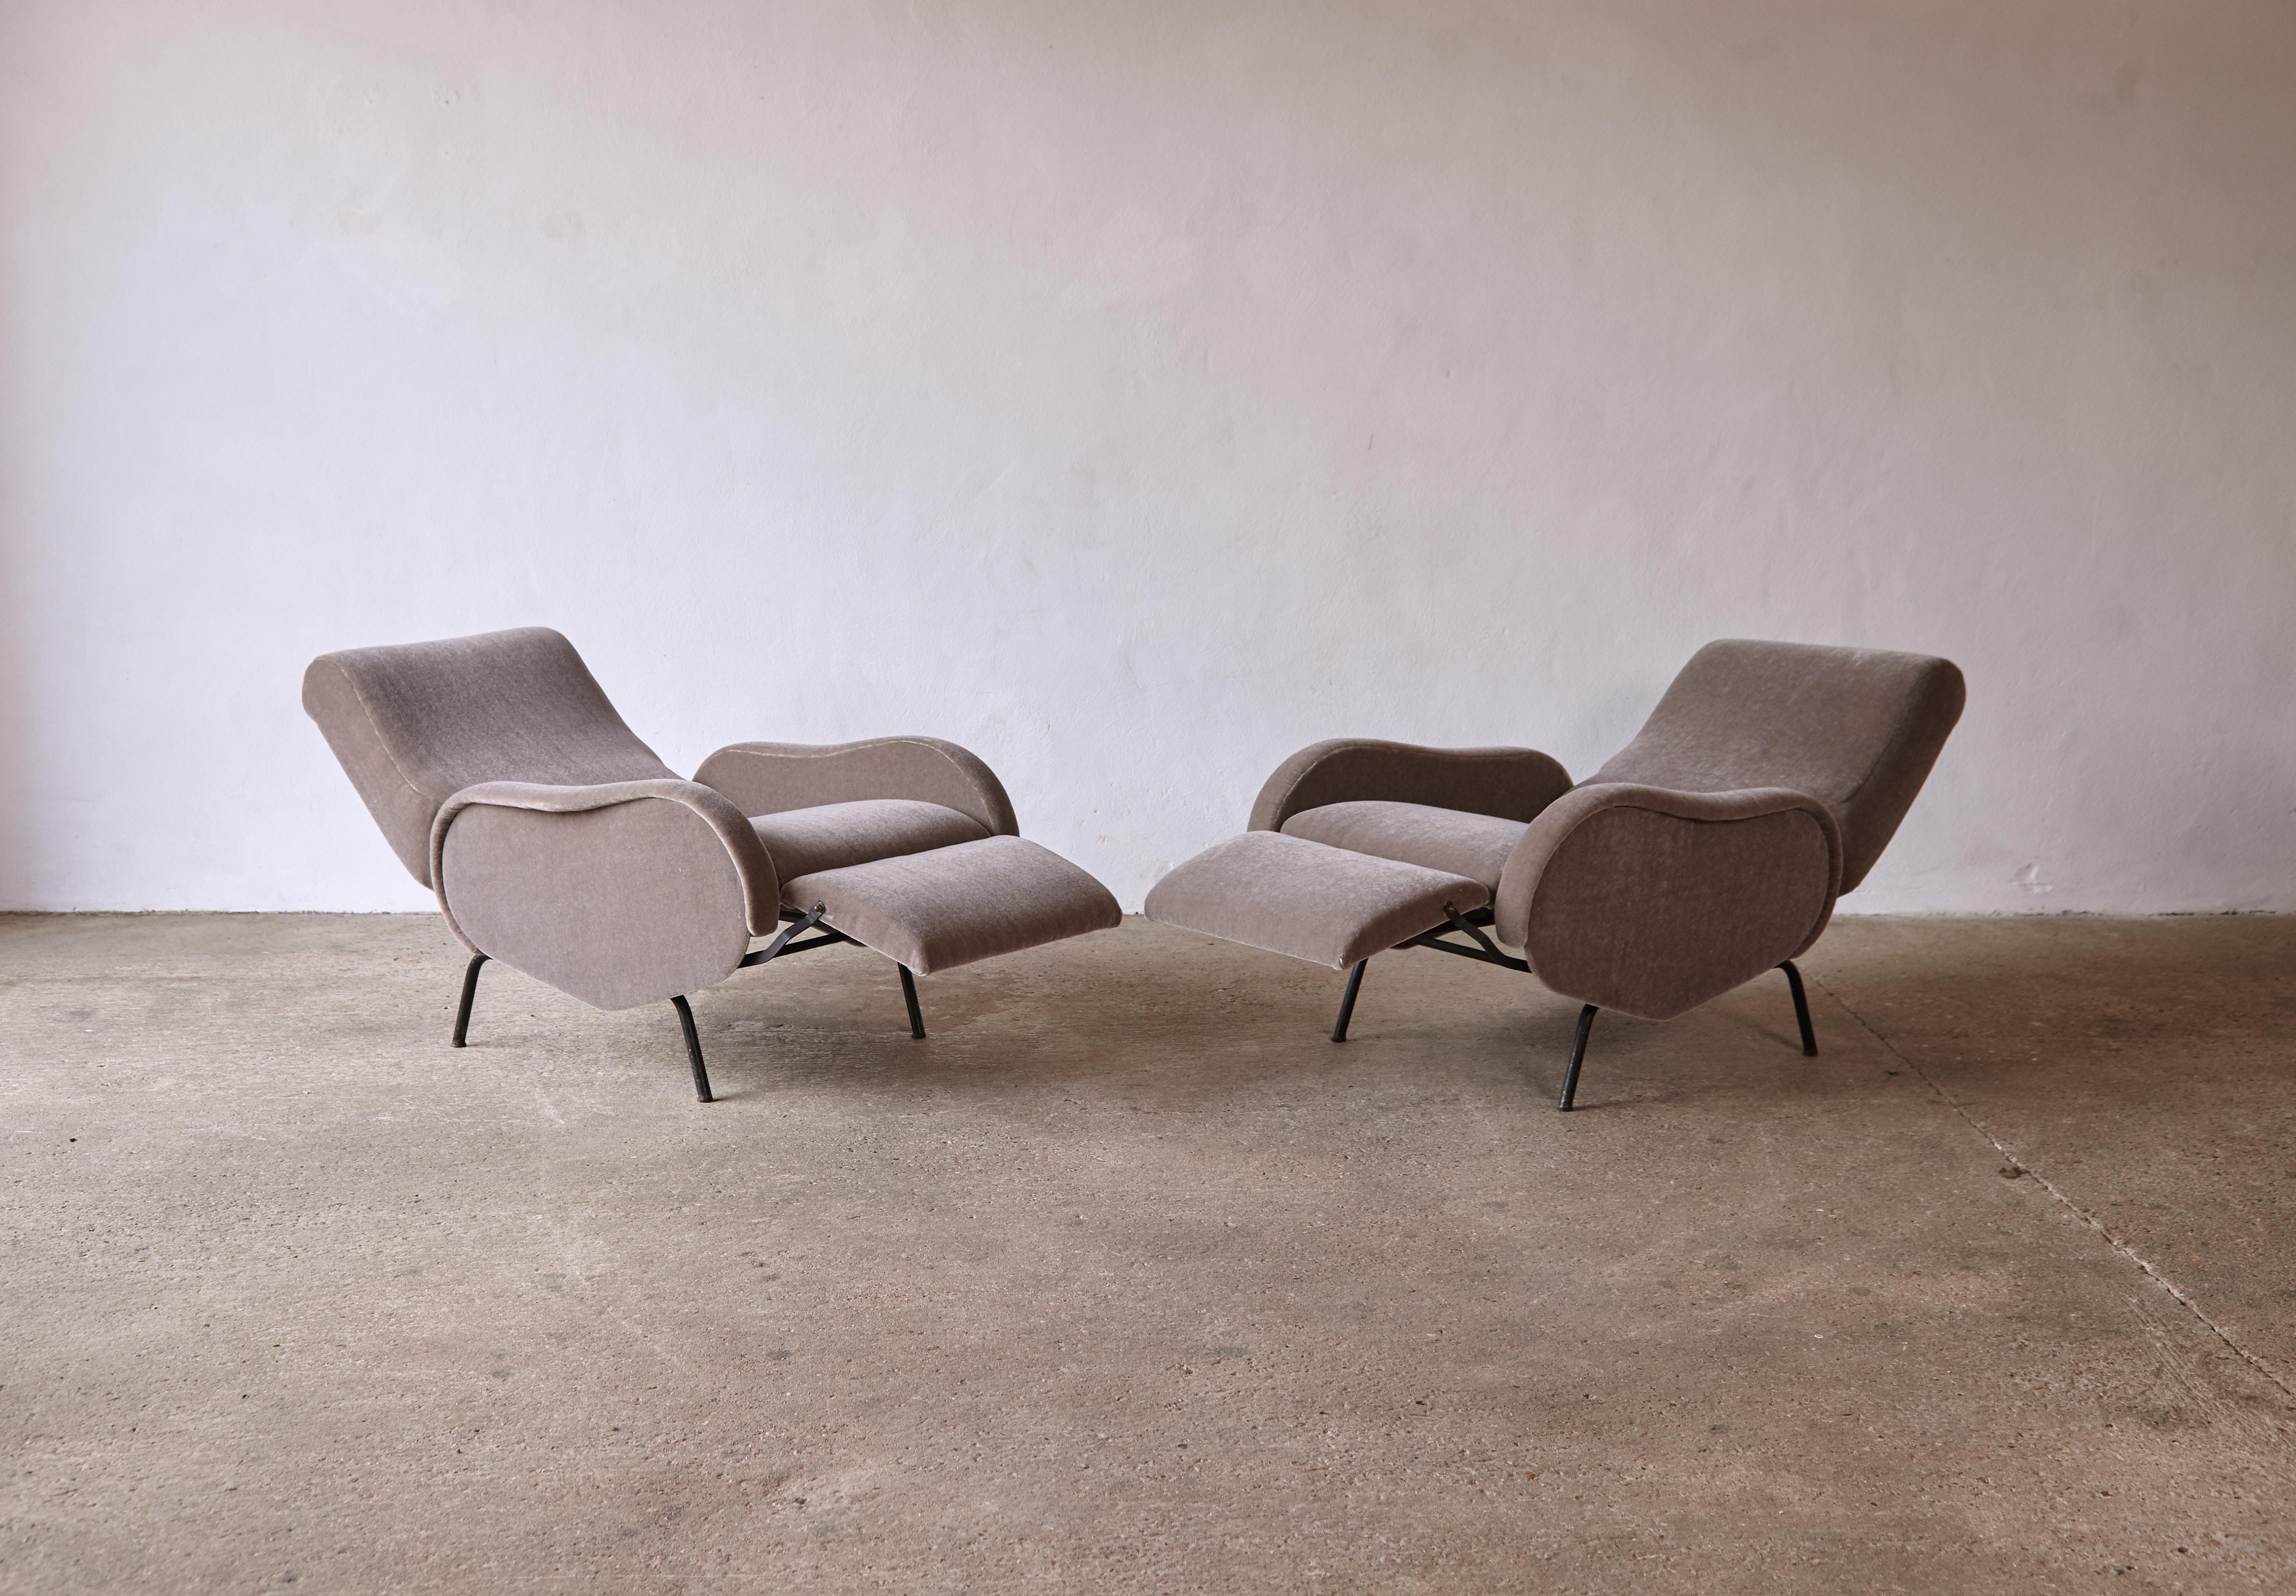 A pair of Marco Zanuso style reclining lady chairs, Italy, 1960s. Newly reupholstered in grey (with a hint of brown) 100% mohair fabric. The recline function works well and the chairs are ready to use. Length when fully reclined 152cm. Ships